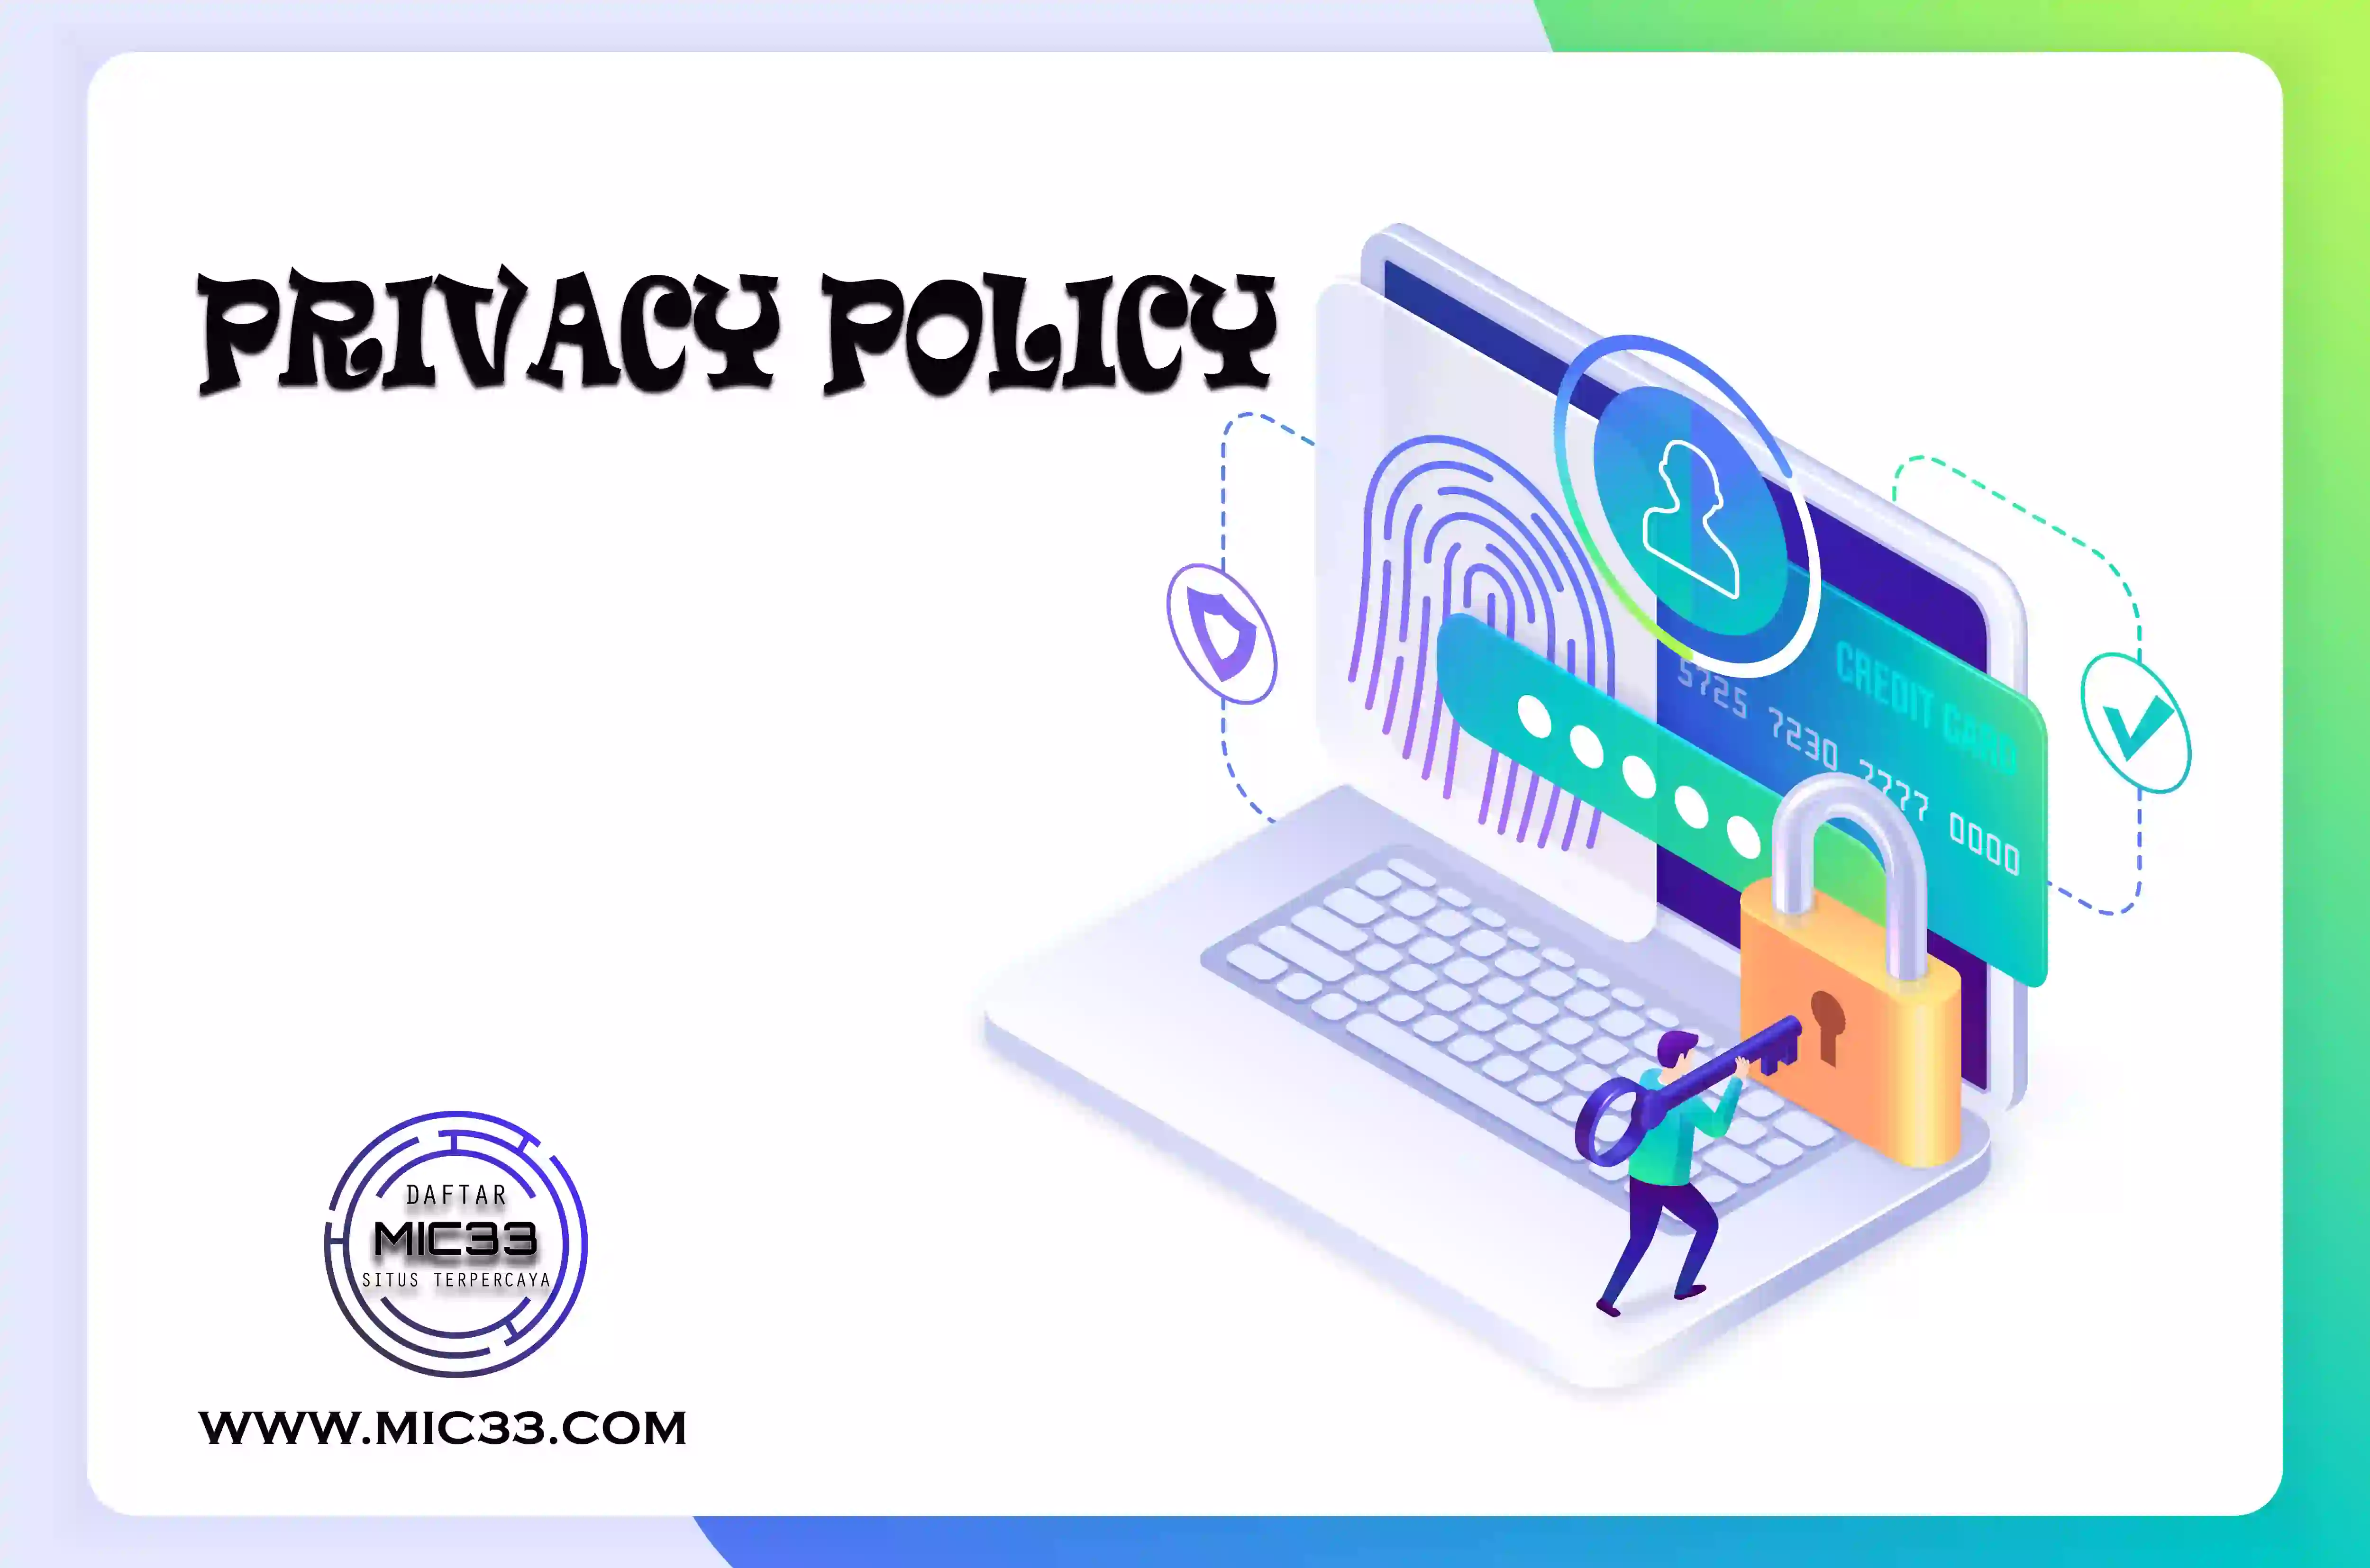 mic33 privacy policy